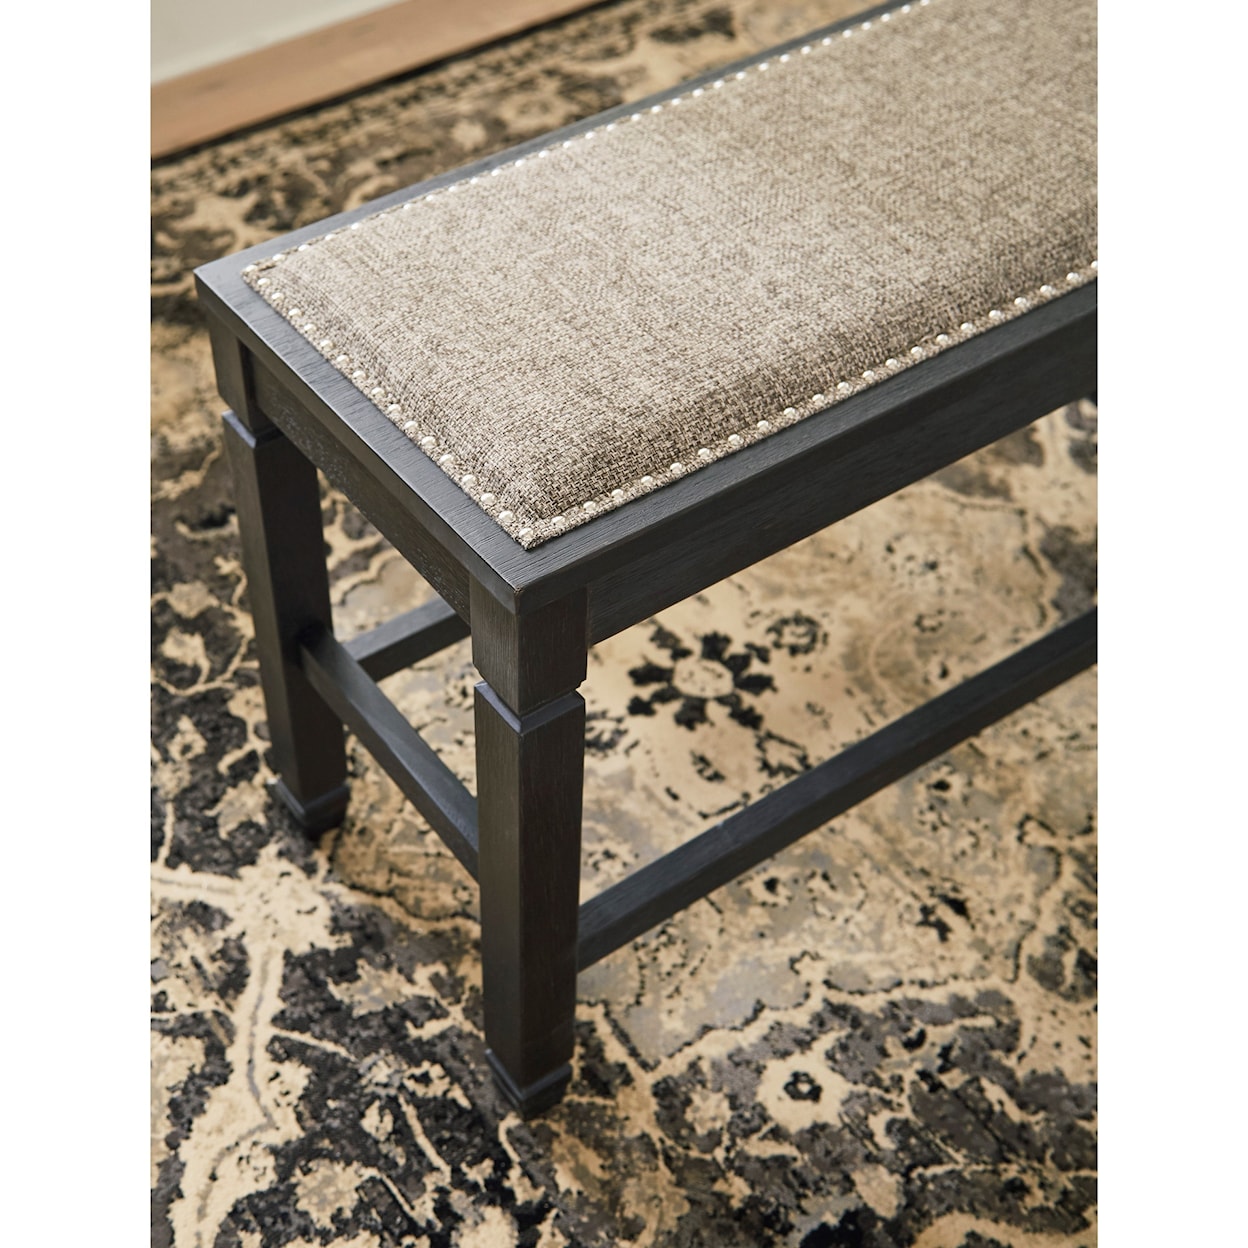 Ashley Signature Design Tyler Creek Double Counter Upholstered Bench